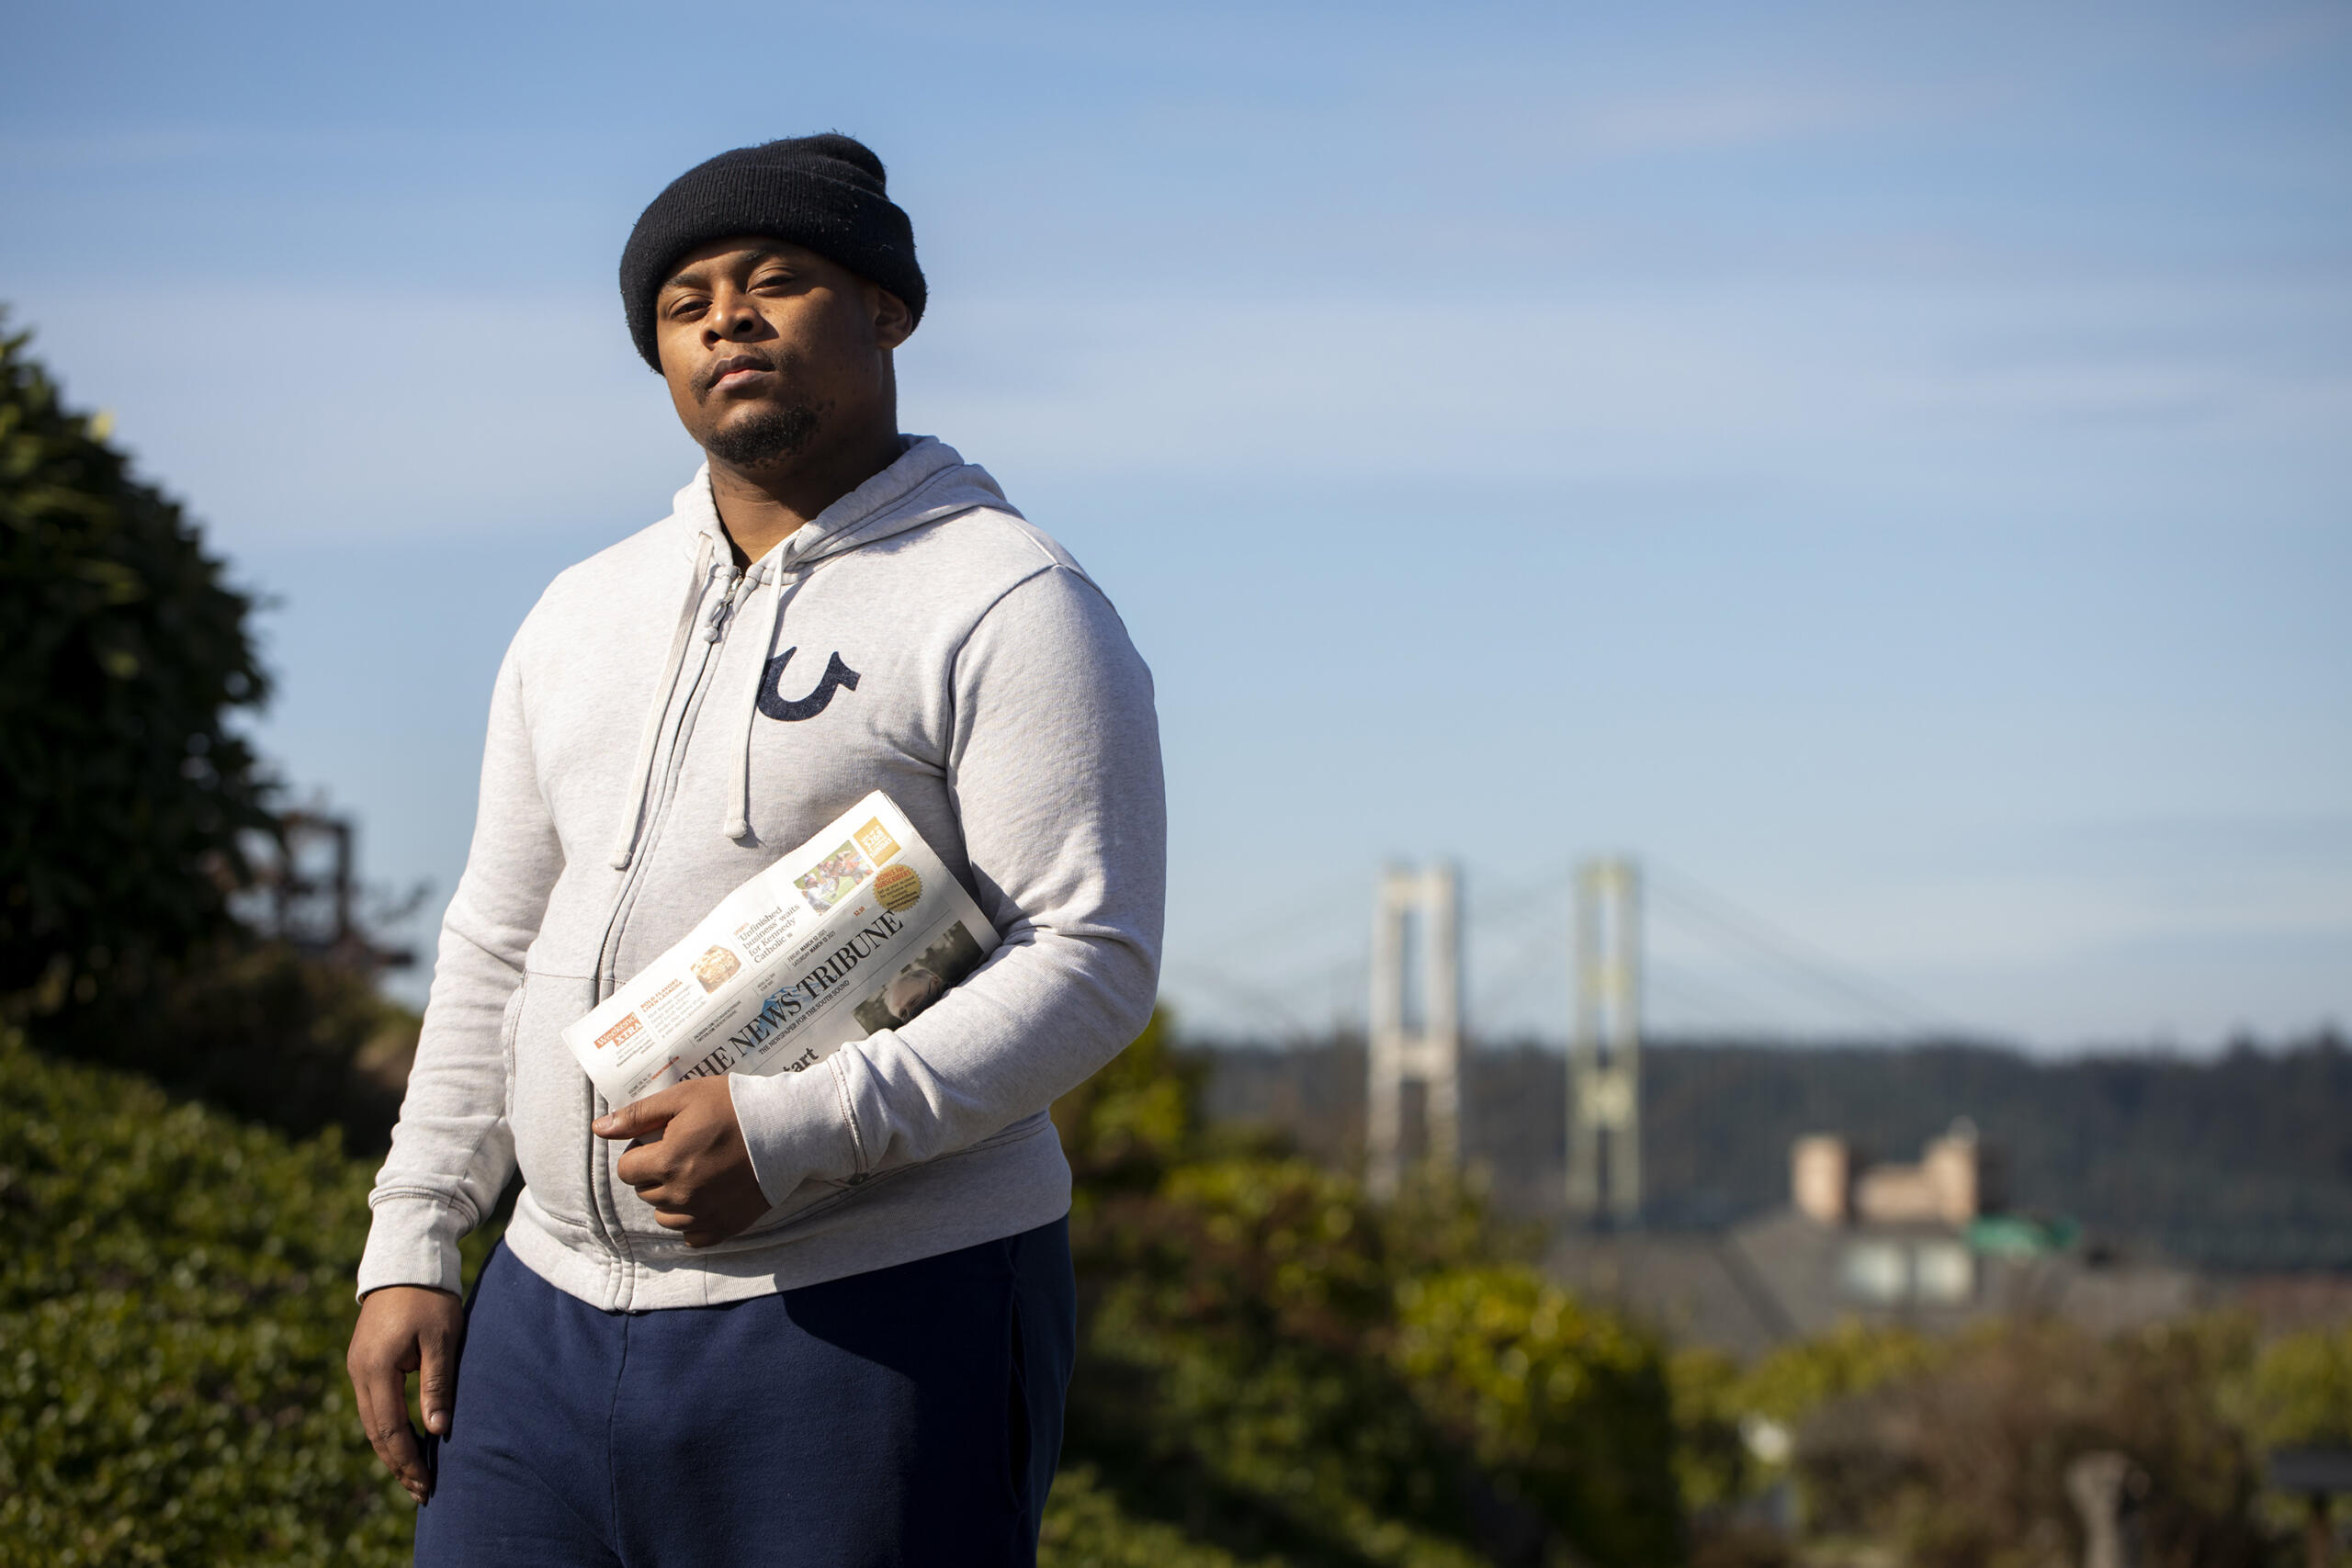 Sedrick Altheimer, 24, was delivering newspapers on his route in Tacoma, Washington, late at night in January 2021 when a white SUV started following his car in an intimidating manner. Later, he found out that the driver of the car was Pierce County Sheriff Ed Troyer, who did not identify himself and was not in a police car. After a verbal confrontation, Troyer called in more than 40 cops to the scene.